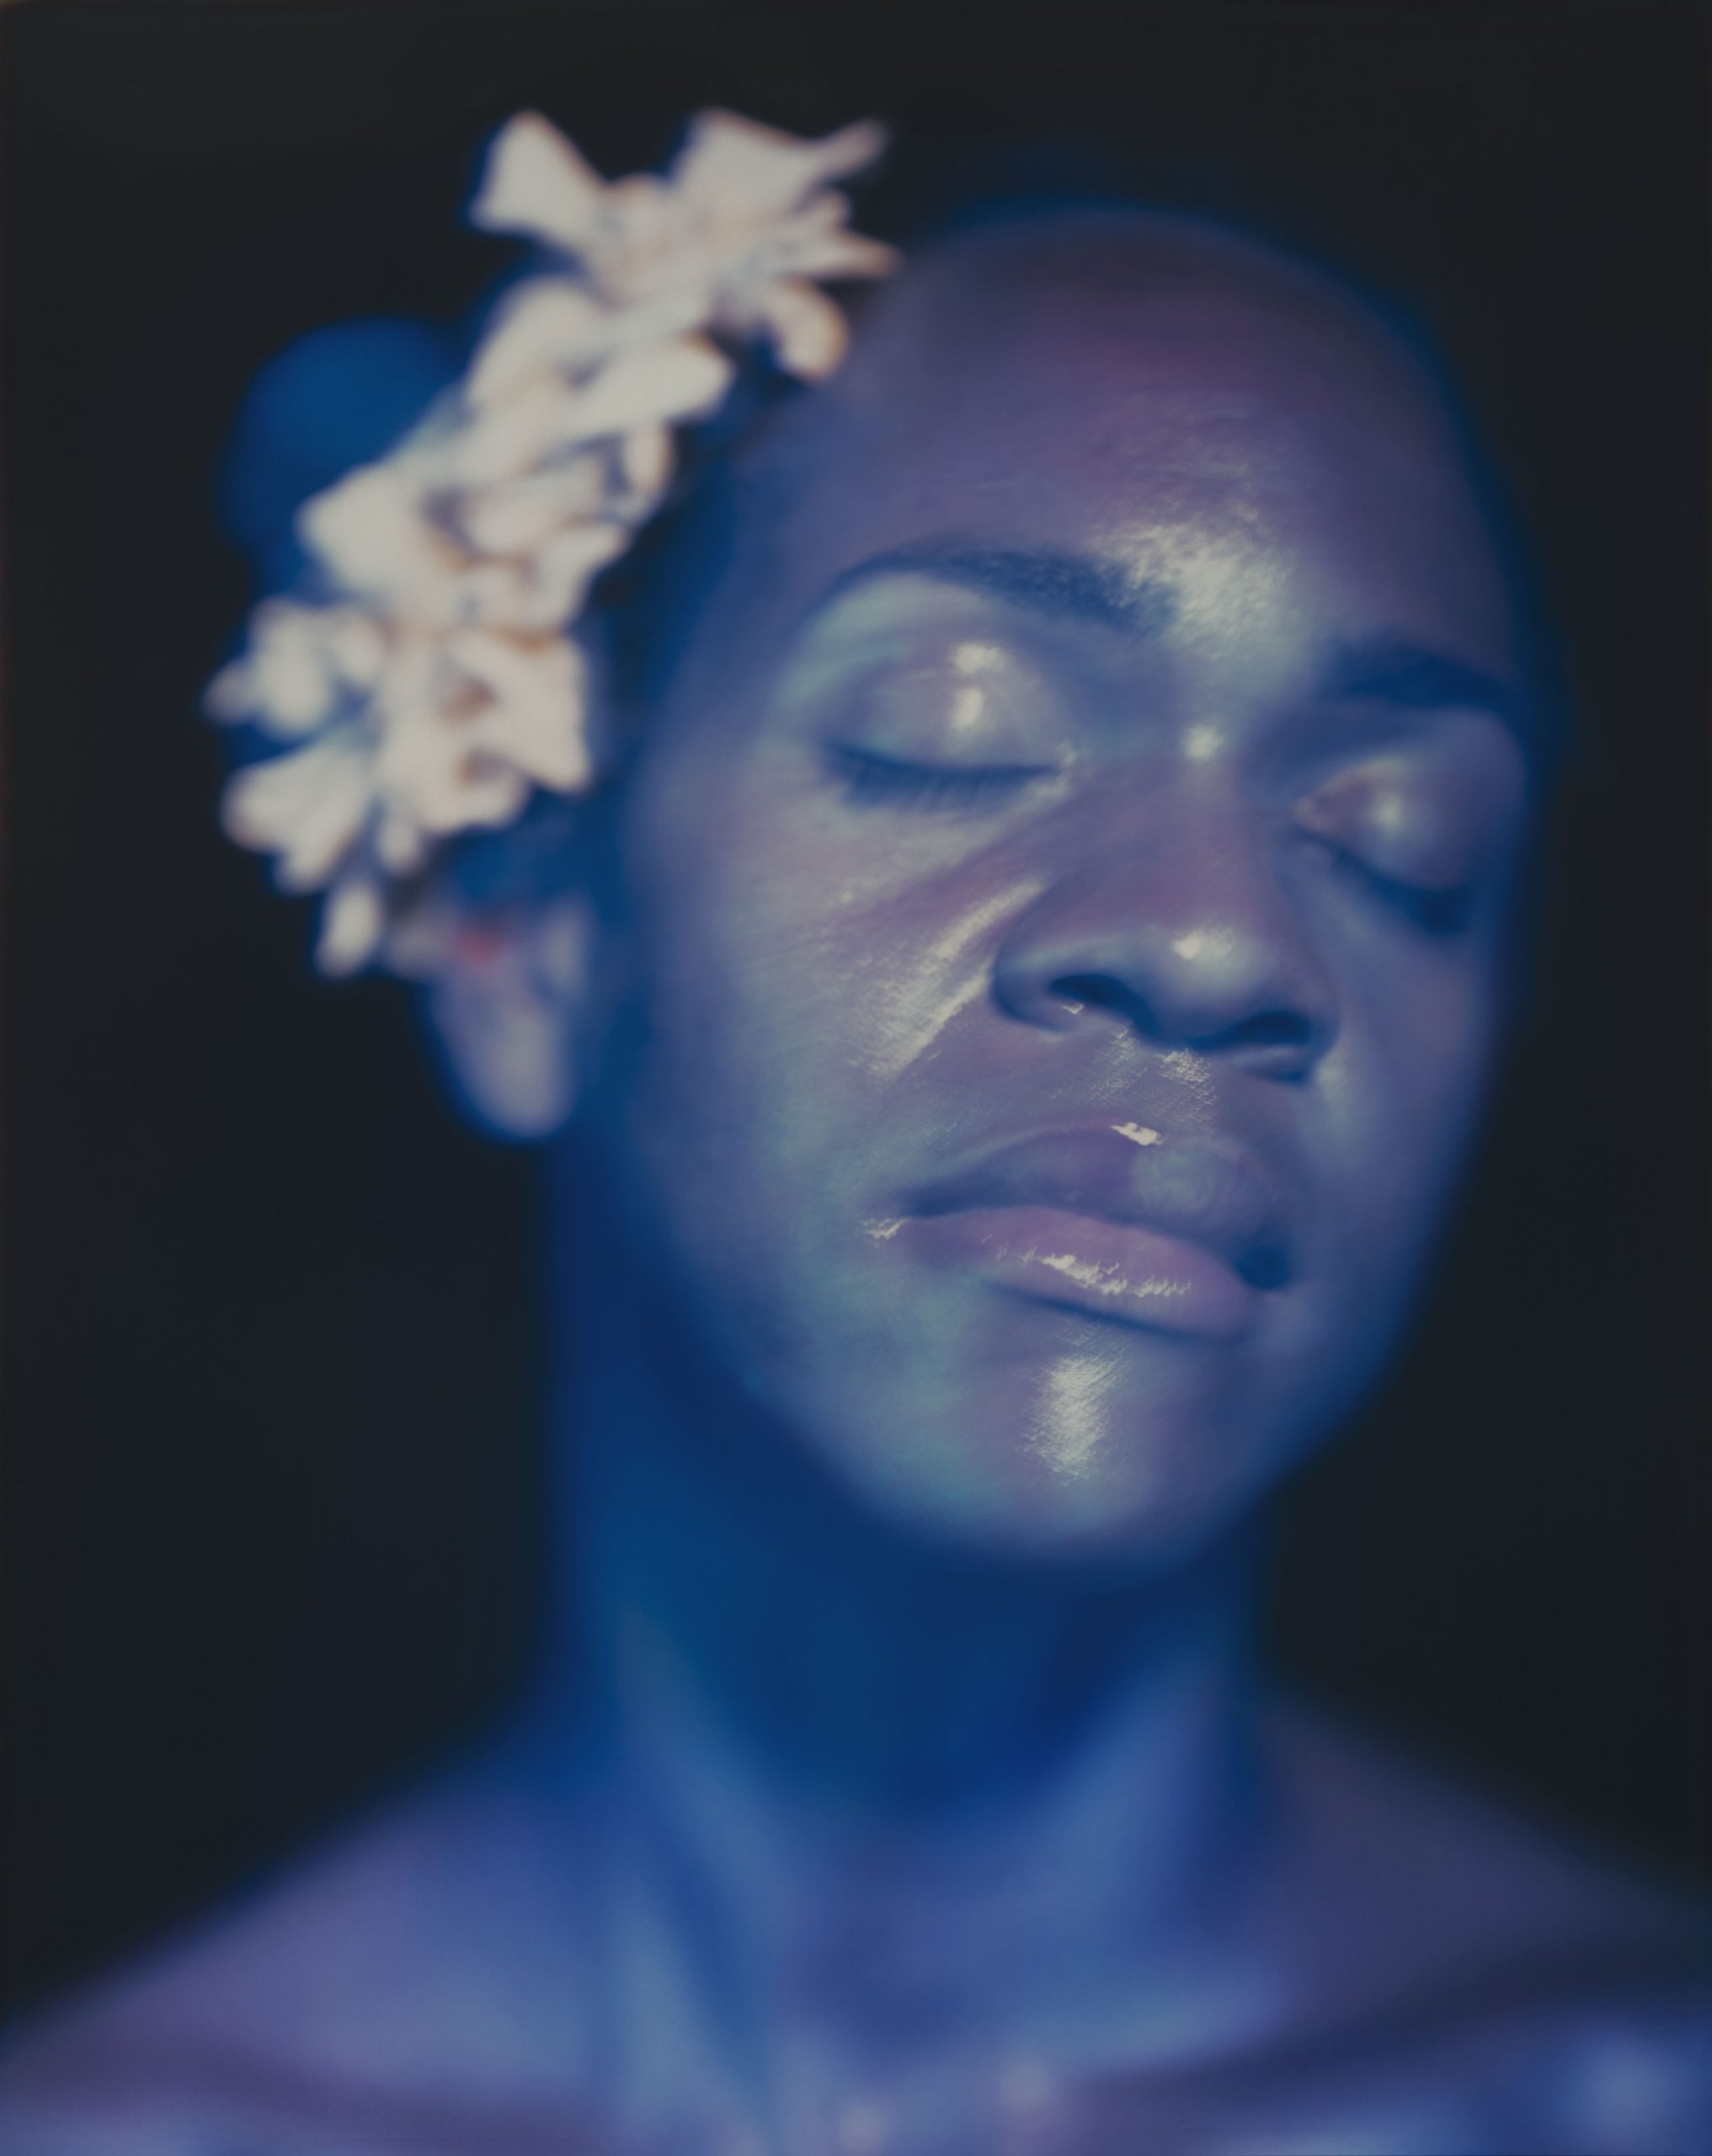 A tight headshot of artist Lyle Ashton Harris resembling singer Billie Holiday. His eyes are closed and his glowing skin is bathed in blue hues. A cluster of flowers are pinned to the side of his head.